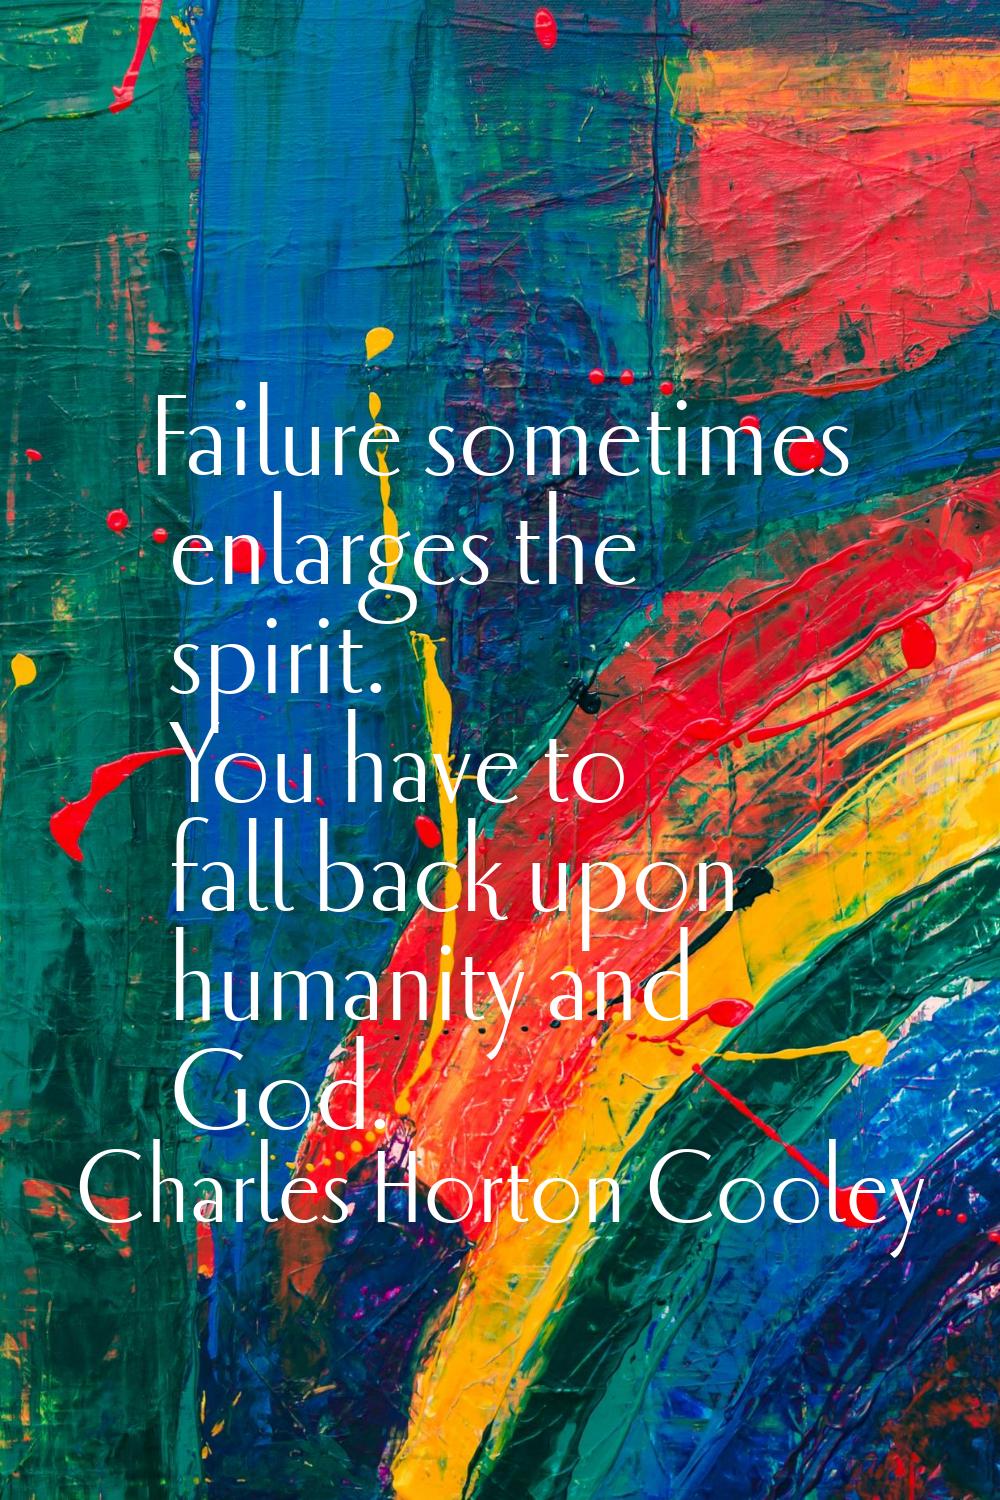 Failure sometimes enlarges the spirit. You have to fall back upon humanity and God.